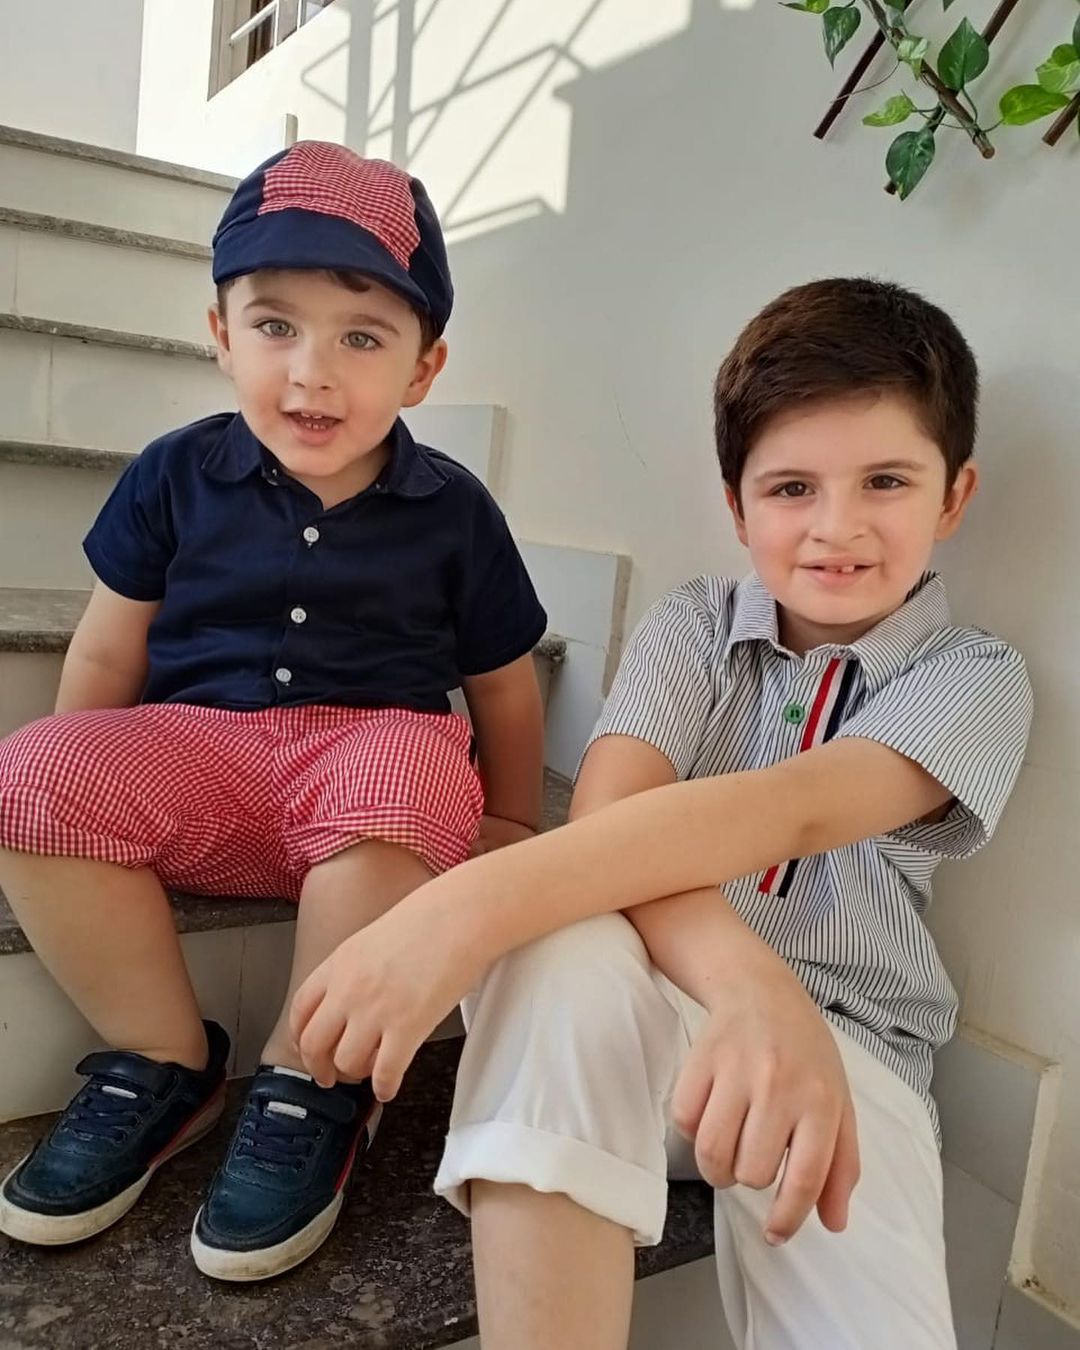 Latest Pictures of Fatima Effendi with her Cute Sons